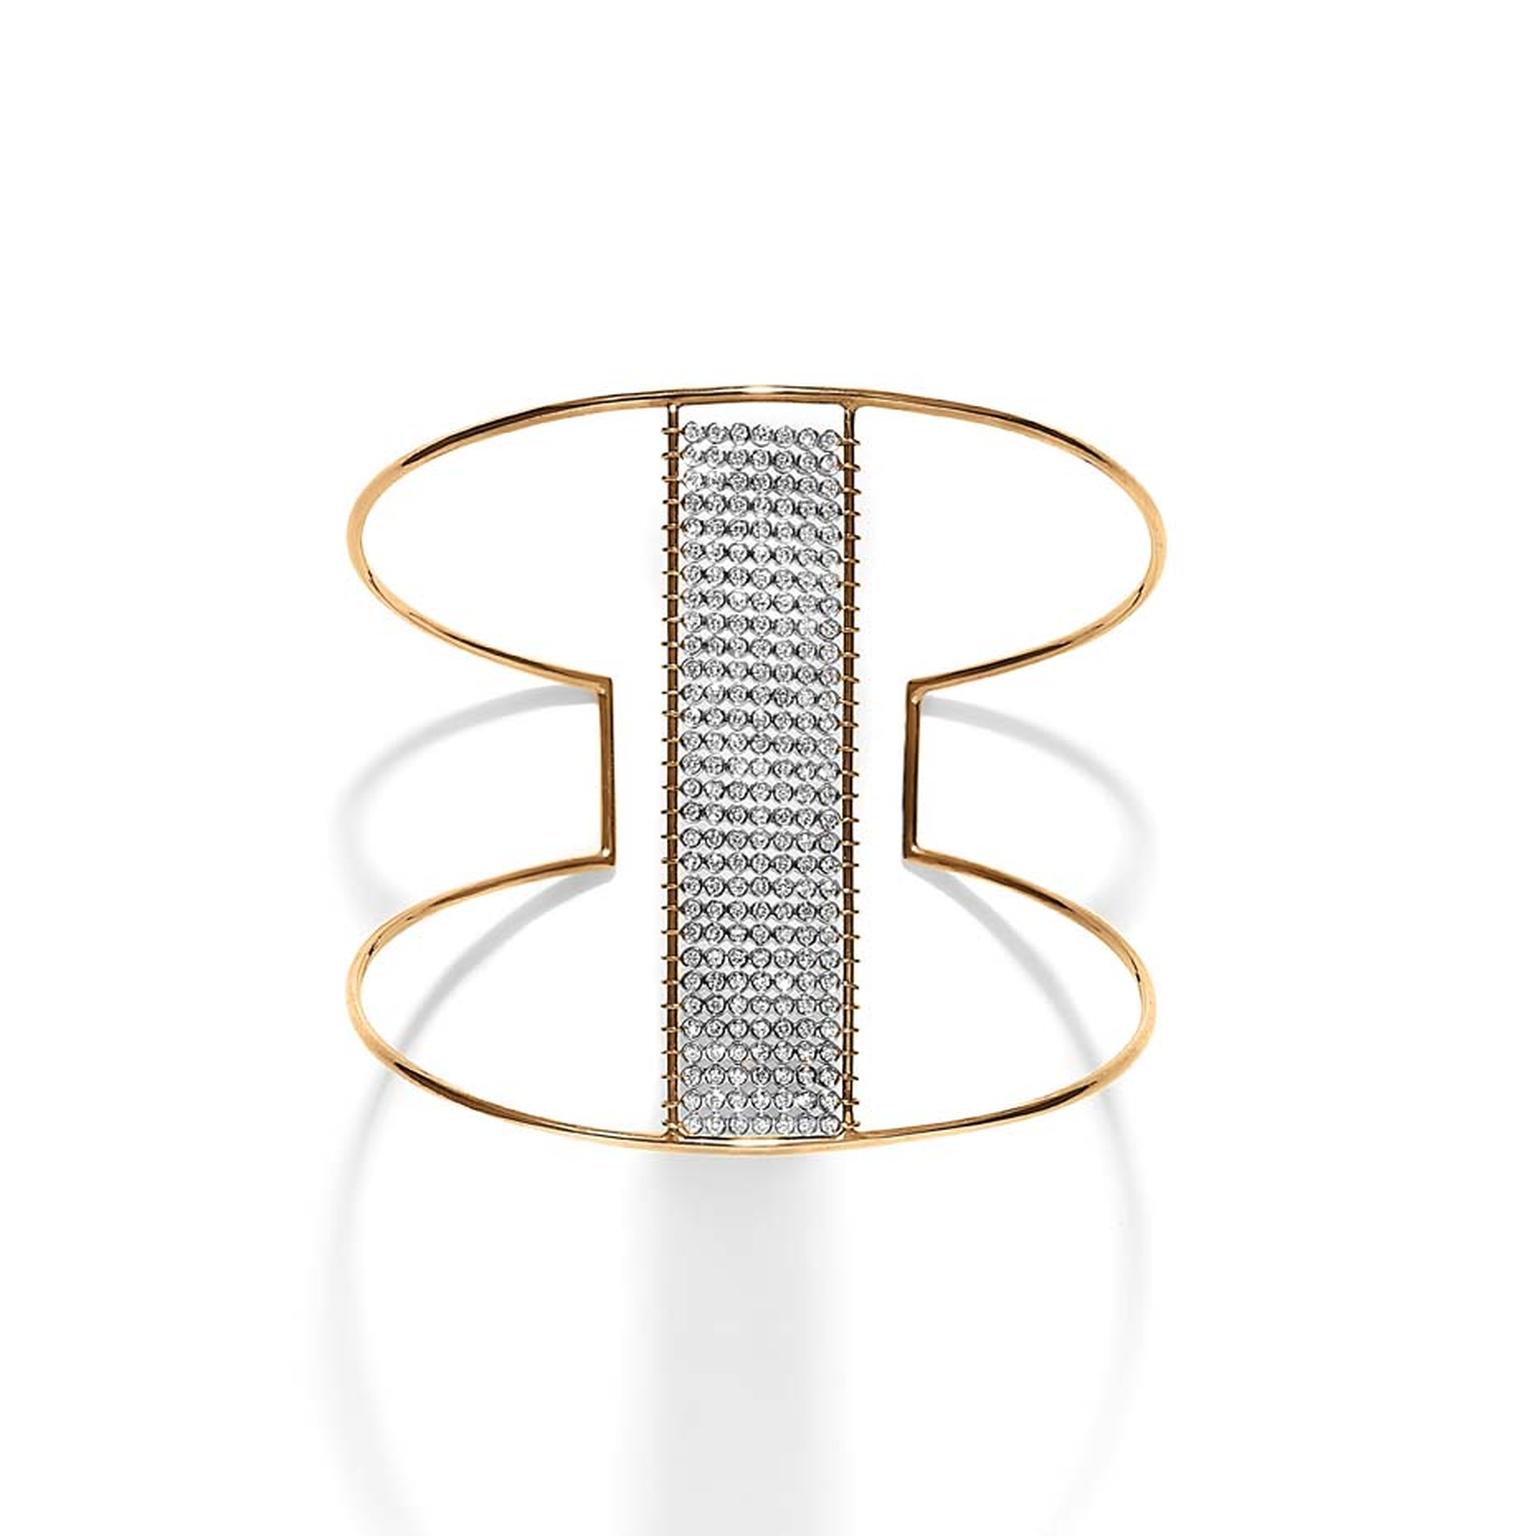 Yannis Sergakis Charnières cuff in rose and black gold with brilliant-cut diamonds.